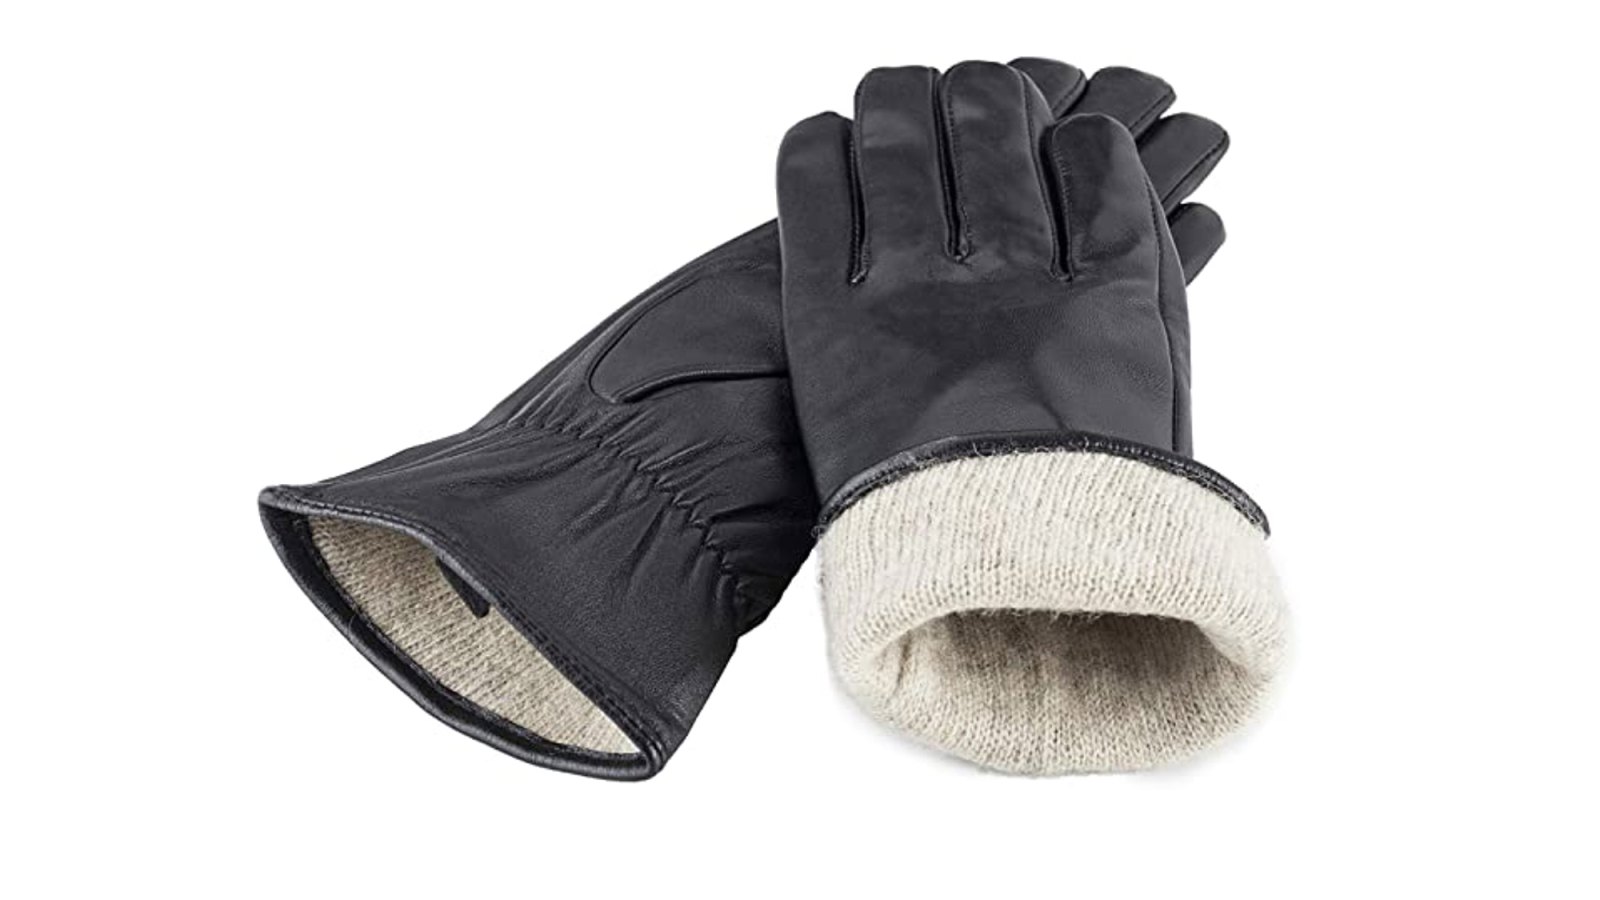 SG Fashion Tochuty Women's Leather Winter Gloves